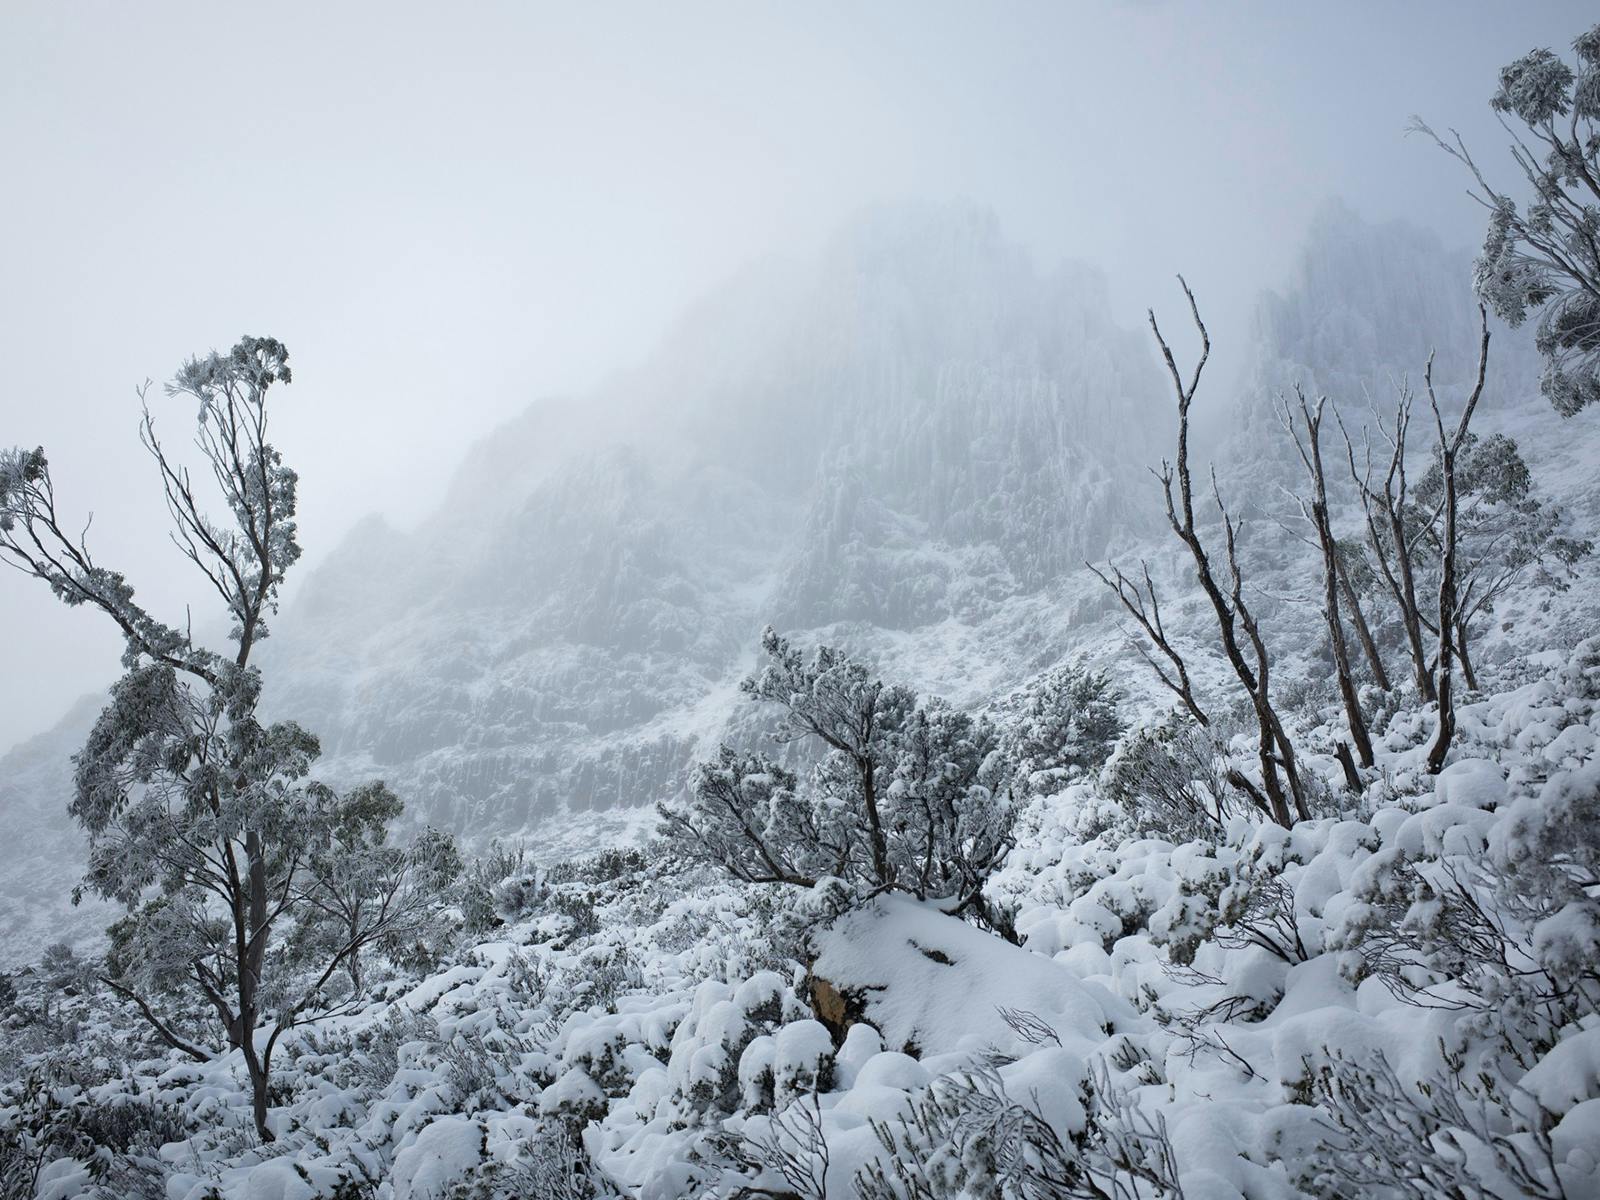 Cradle Mountain Huts Winter view